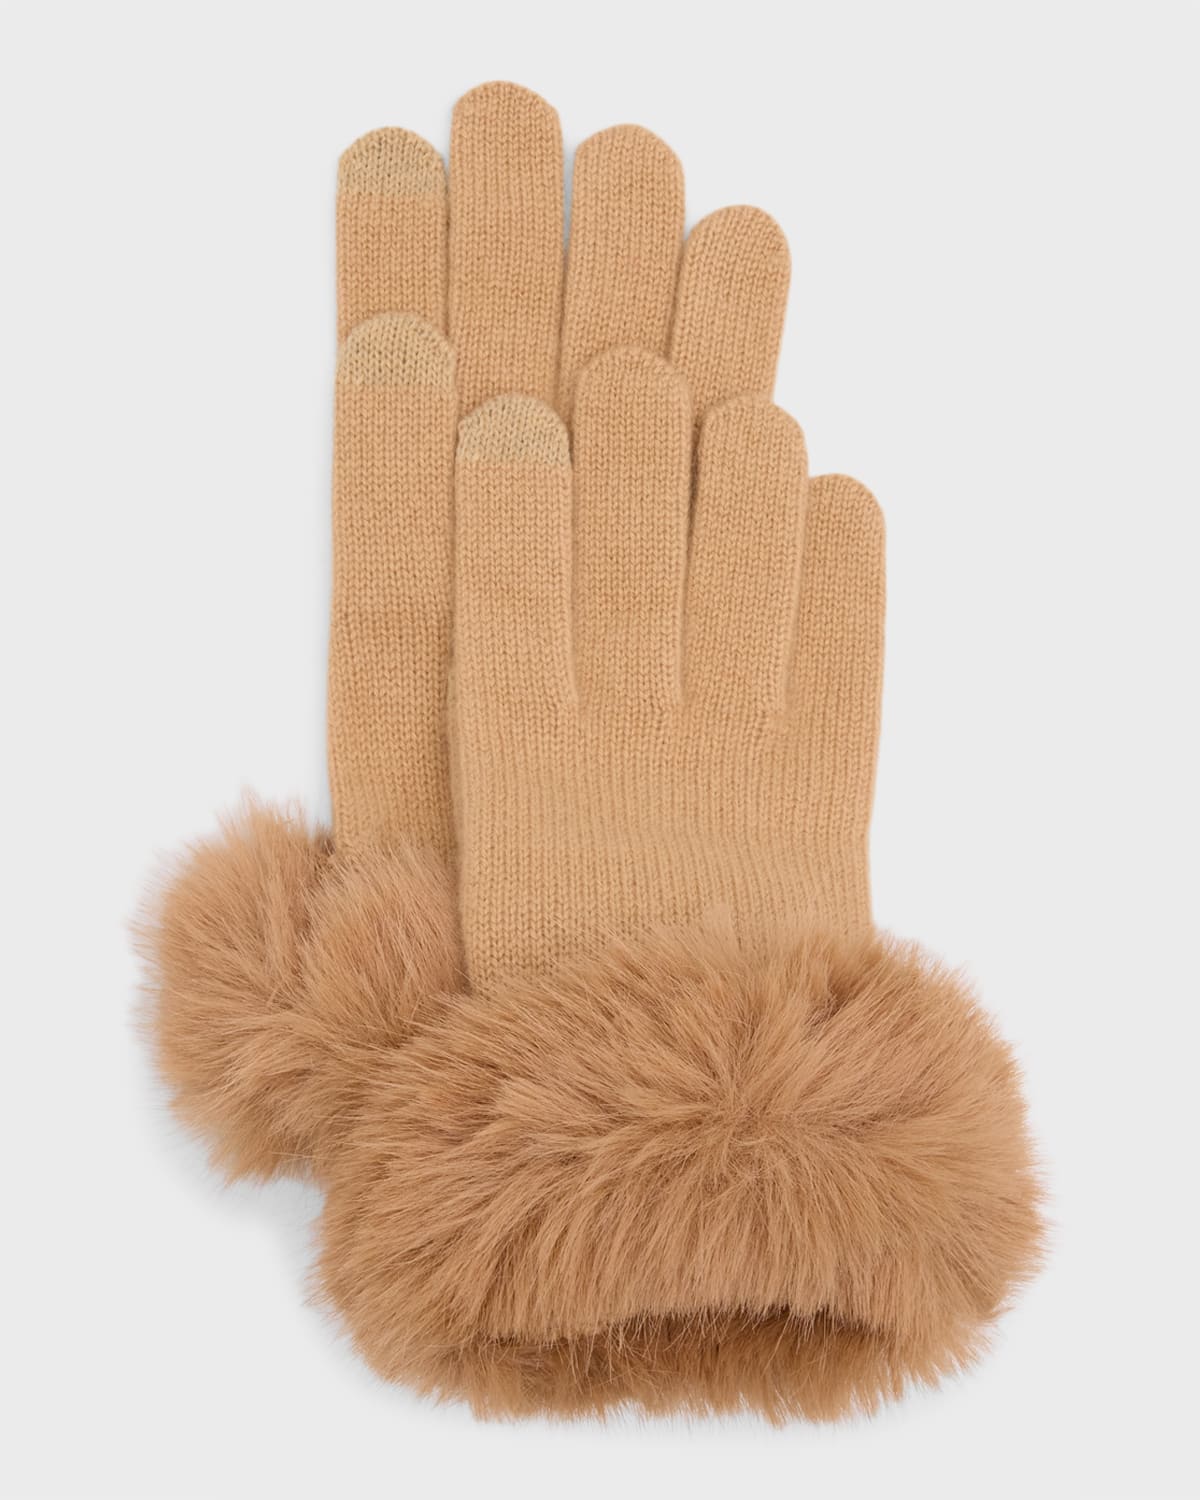 Sofia Cashmere Touchscreen Cashmere & Faux Fur Gloves In Camel